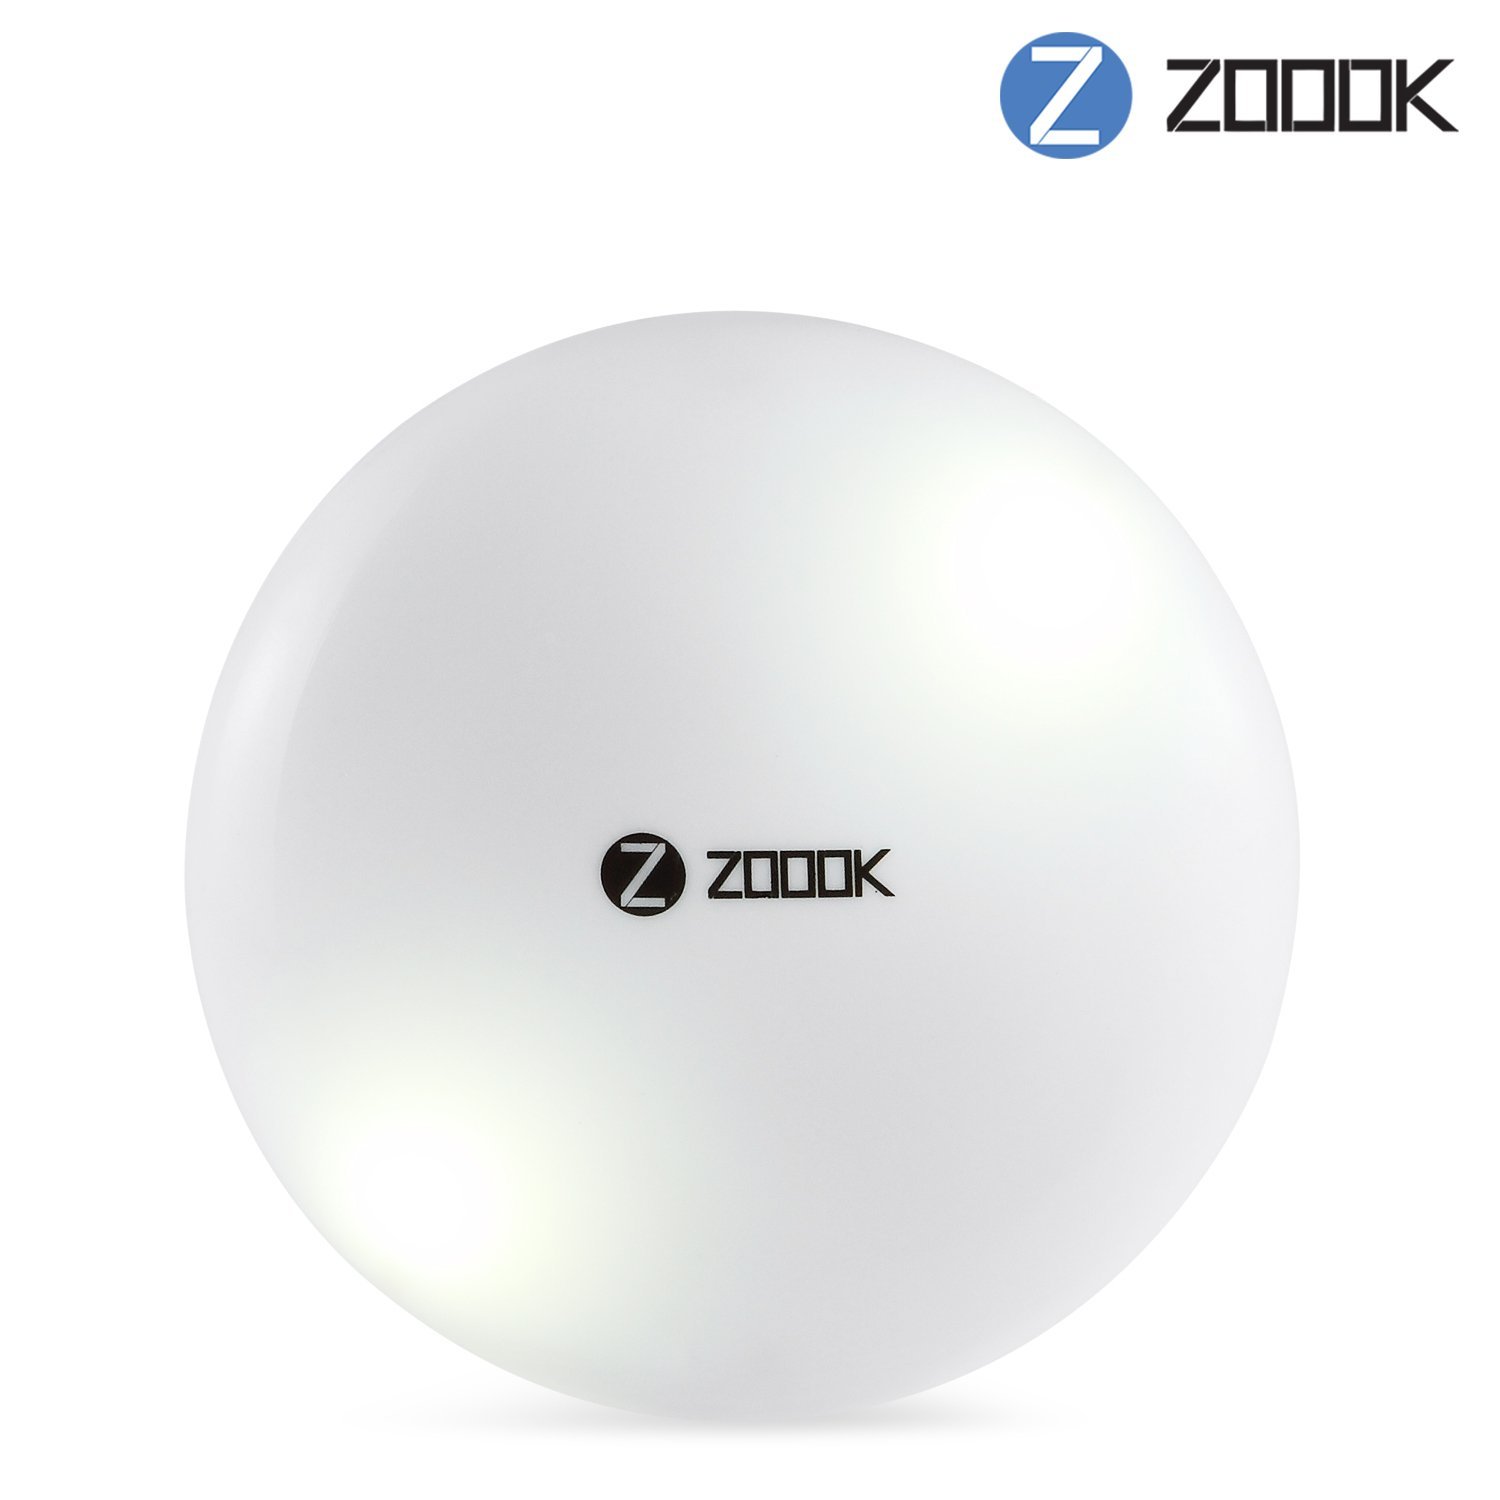 Amazon: Buy Zoook ZMT-Glow Moto69 Touch Sensor Light at Rs 214 only